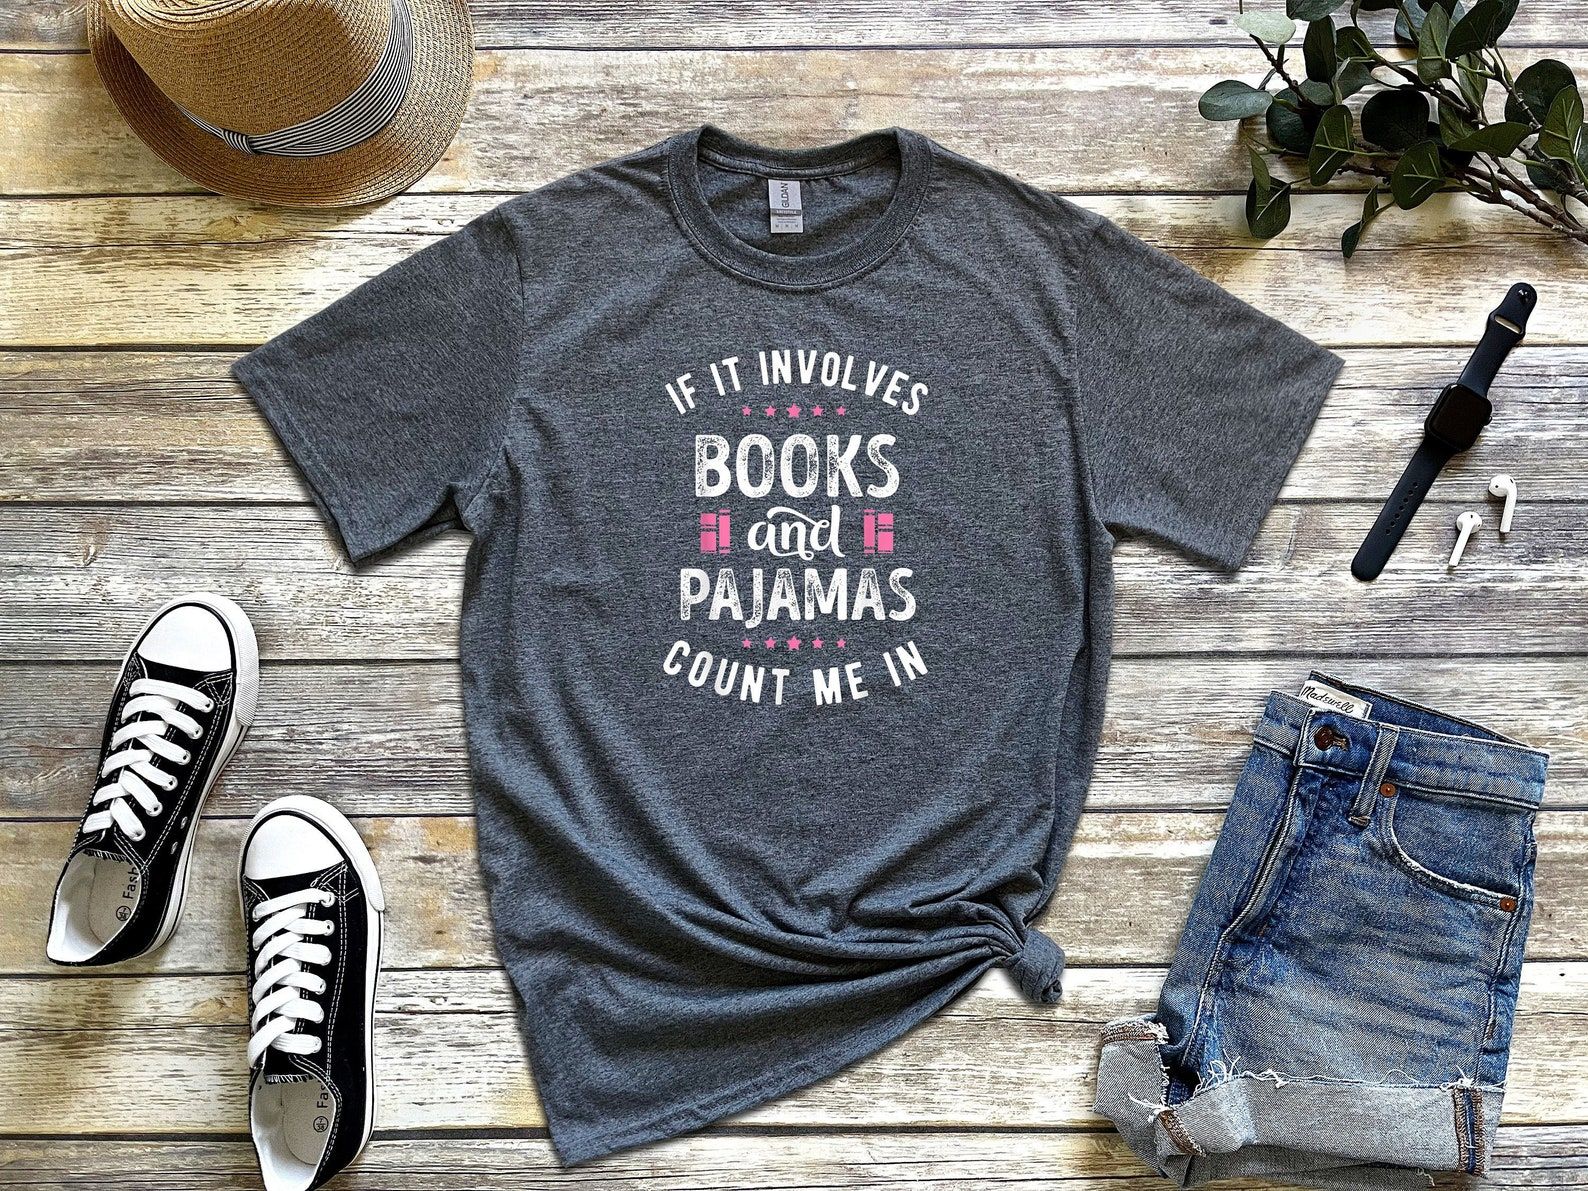 Gray t-shirt that reads If It involves books and pajamas, count me in"